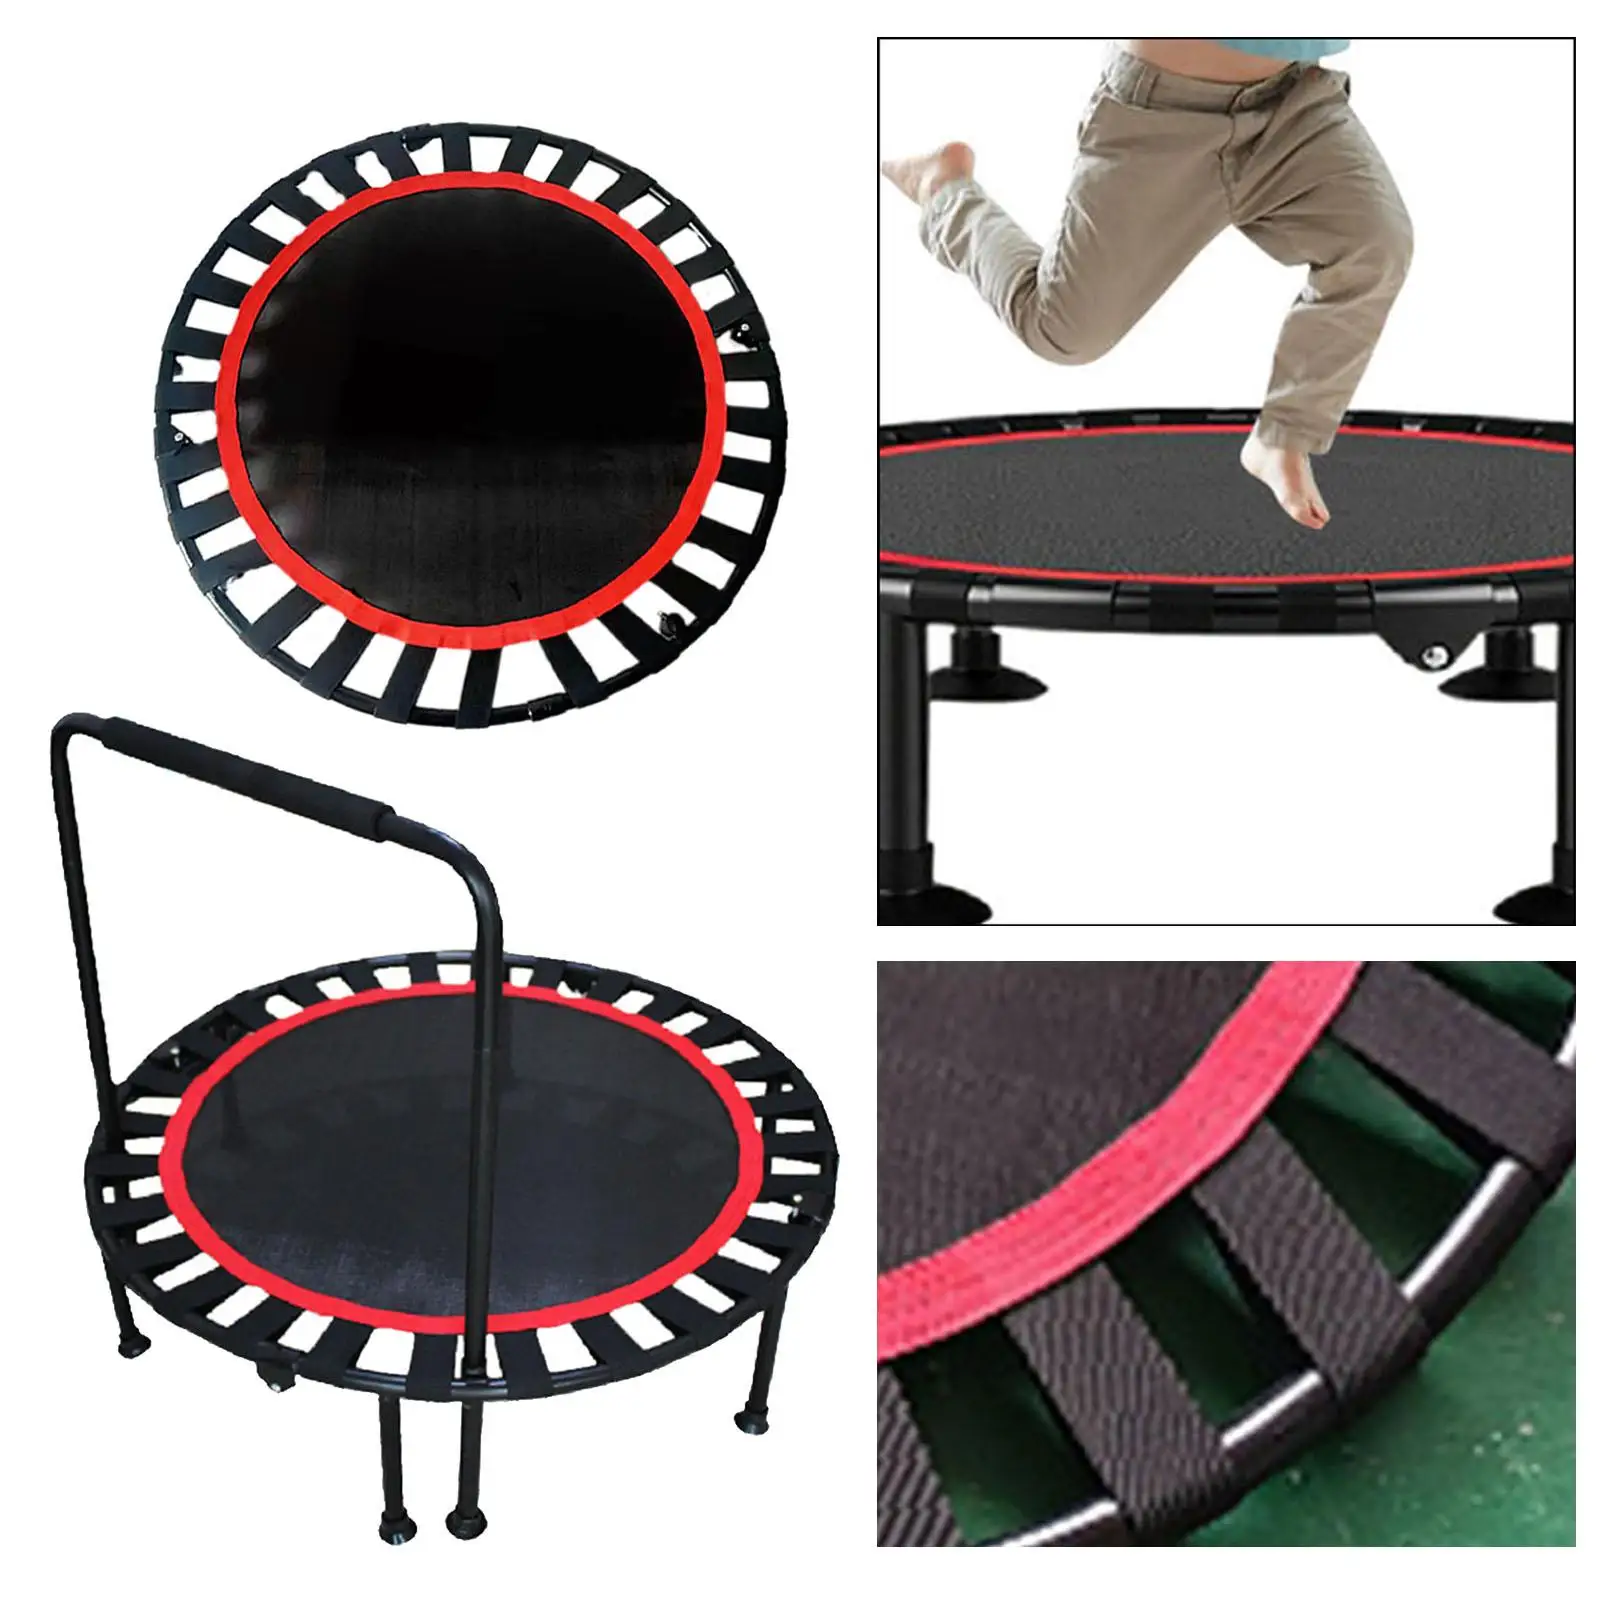 Premium Jumping Mat Jump Bed Water Resistant Safety Birthday Gifts Long Lasting Round Trampoline Trampoline Pad for Kids Workout